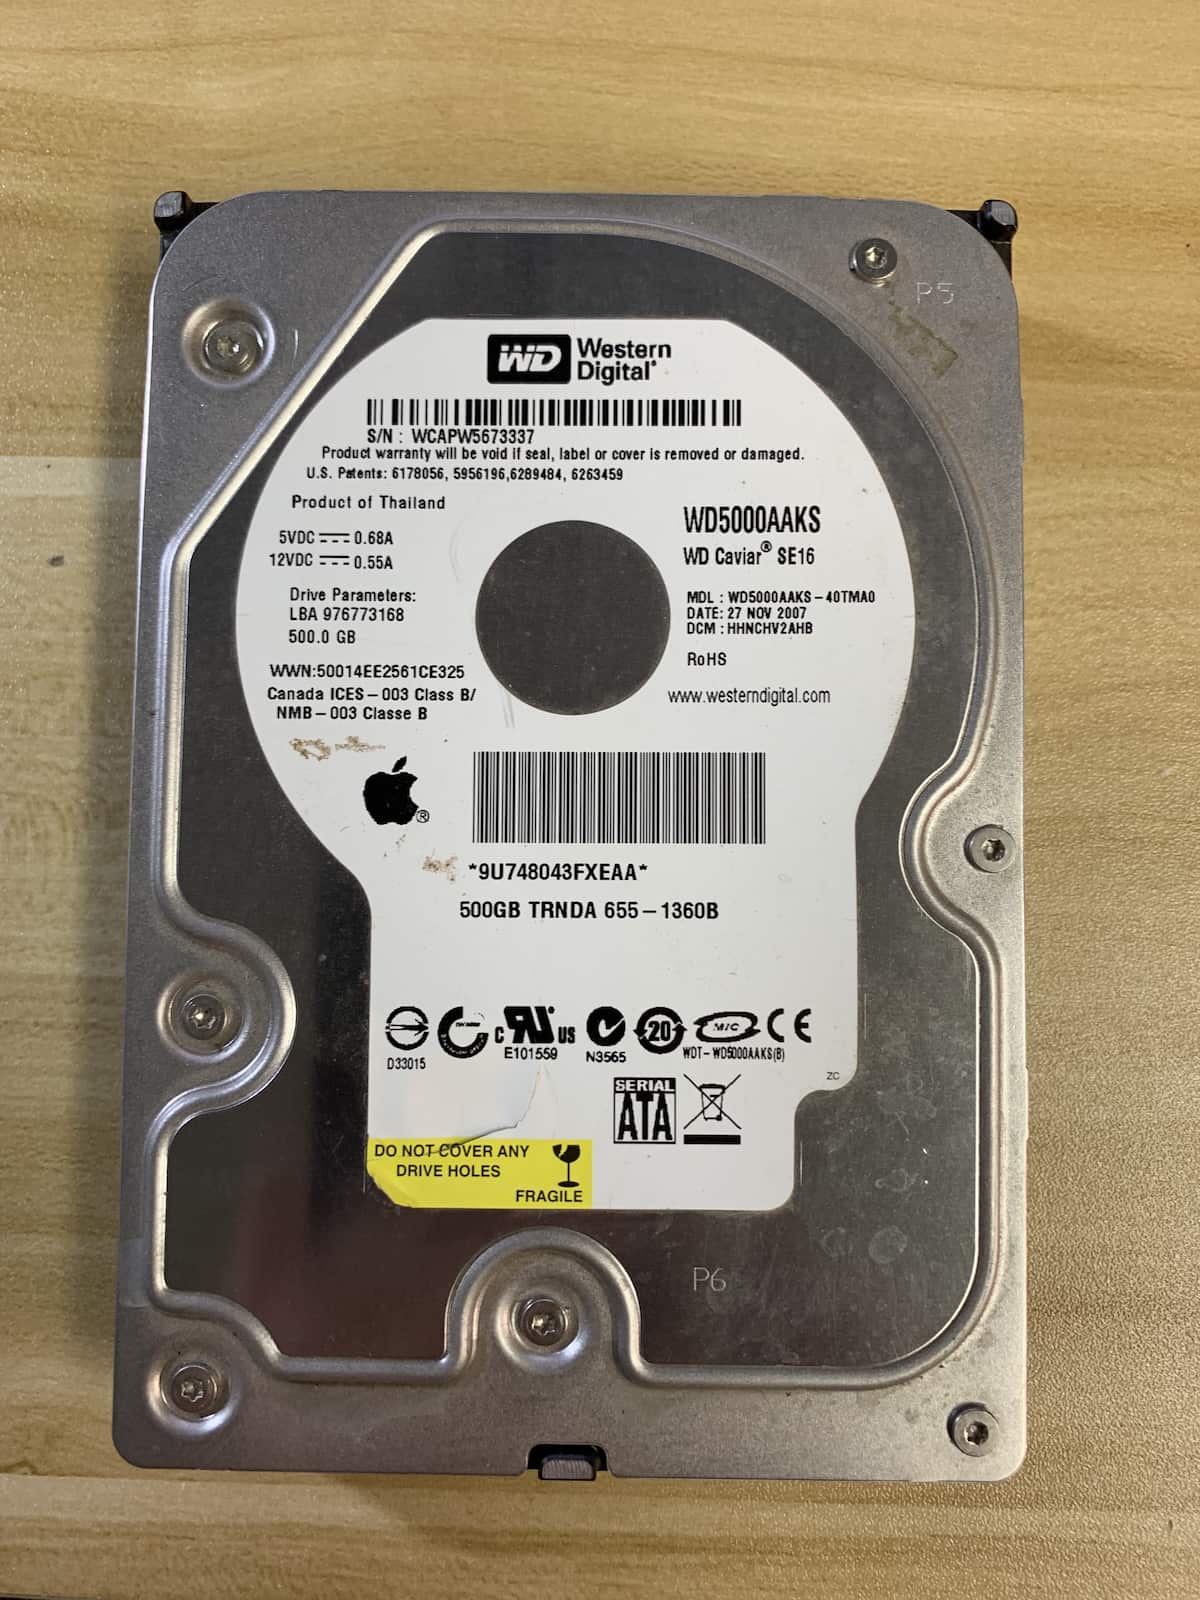 Recovering Data From WD5000AAKS Western Digital Drive